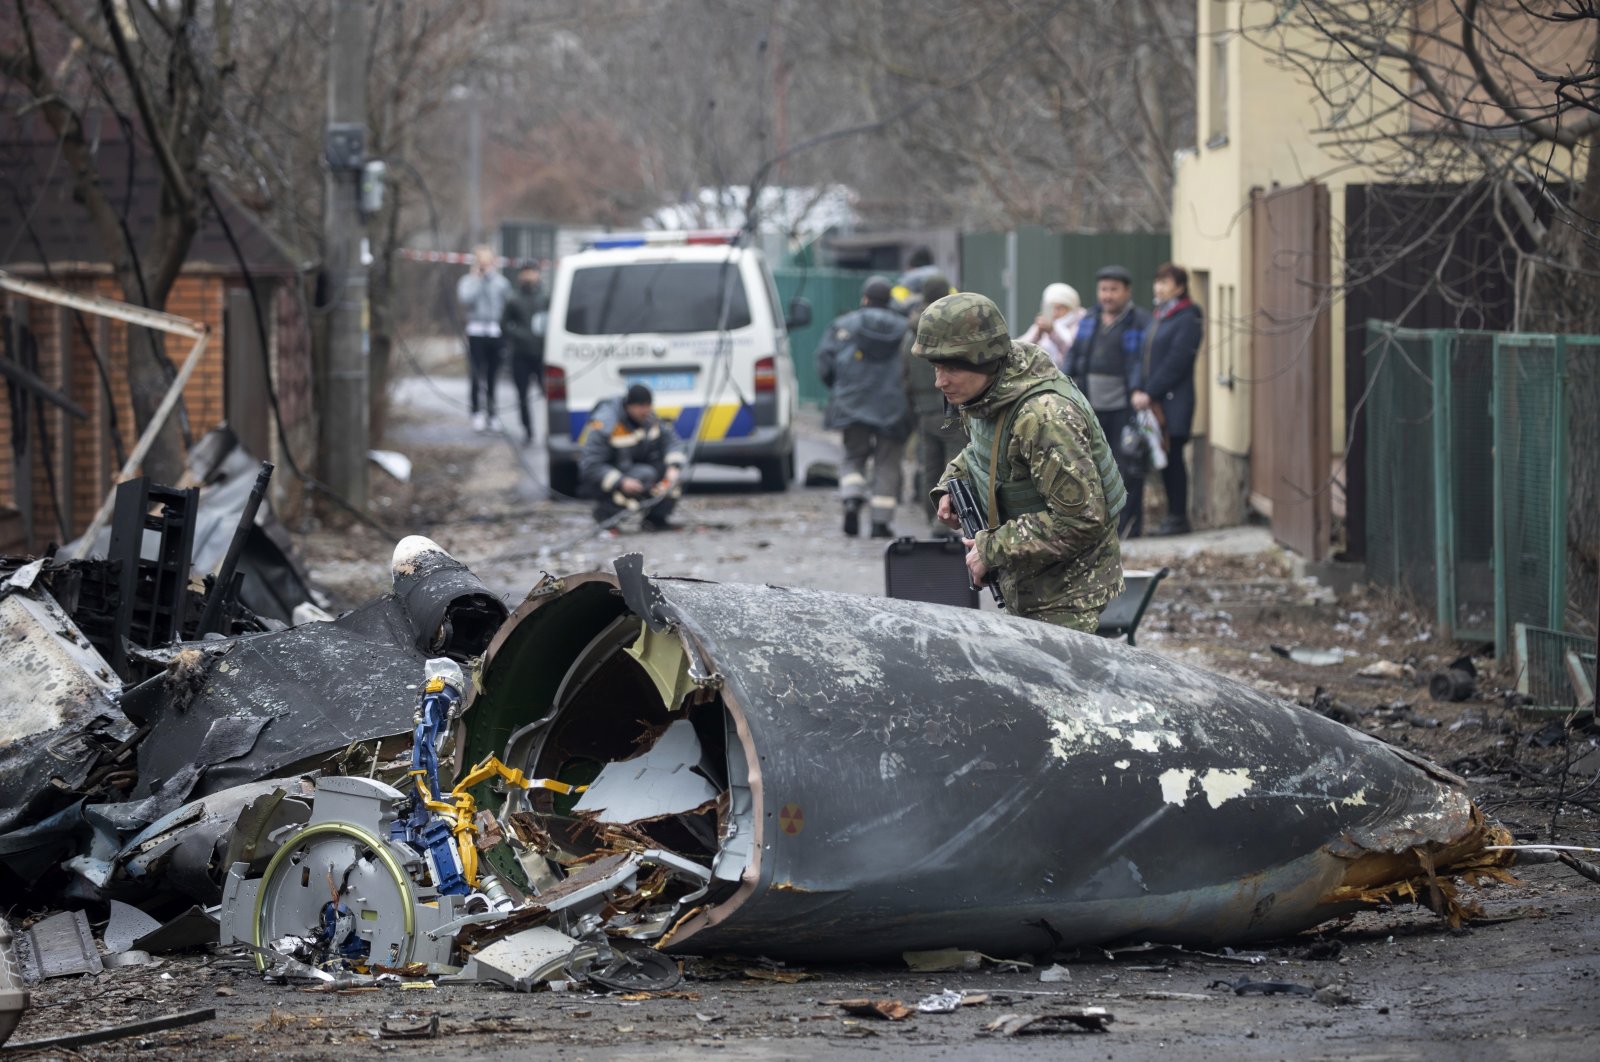 A Ukrainian soldier inspects fragments of a downed aircraft in Kyiv, Ukraine, Feb. 25, 2022.  (AP Photo)